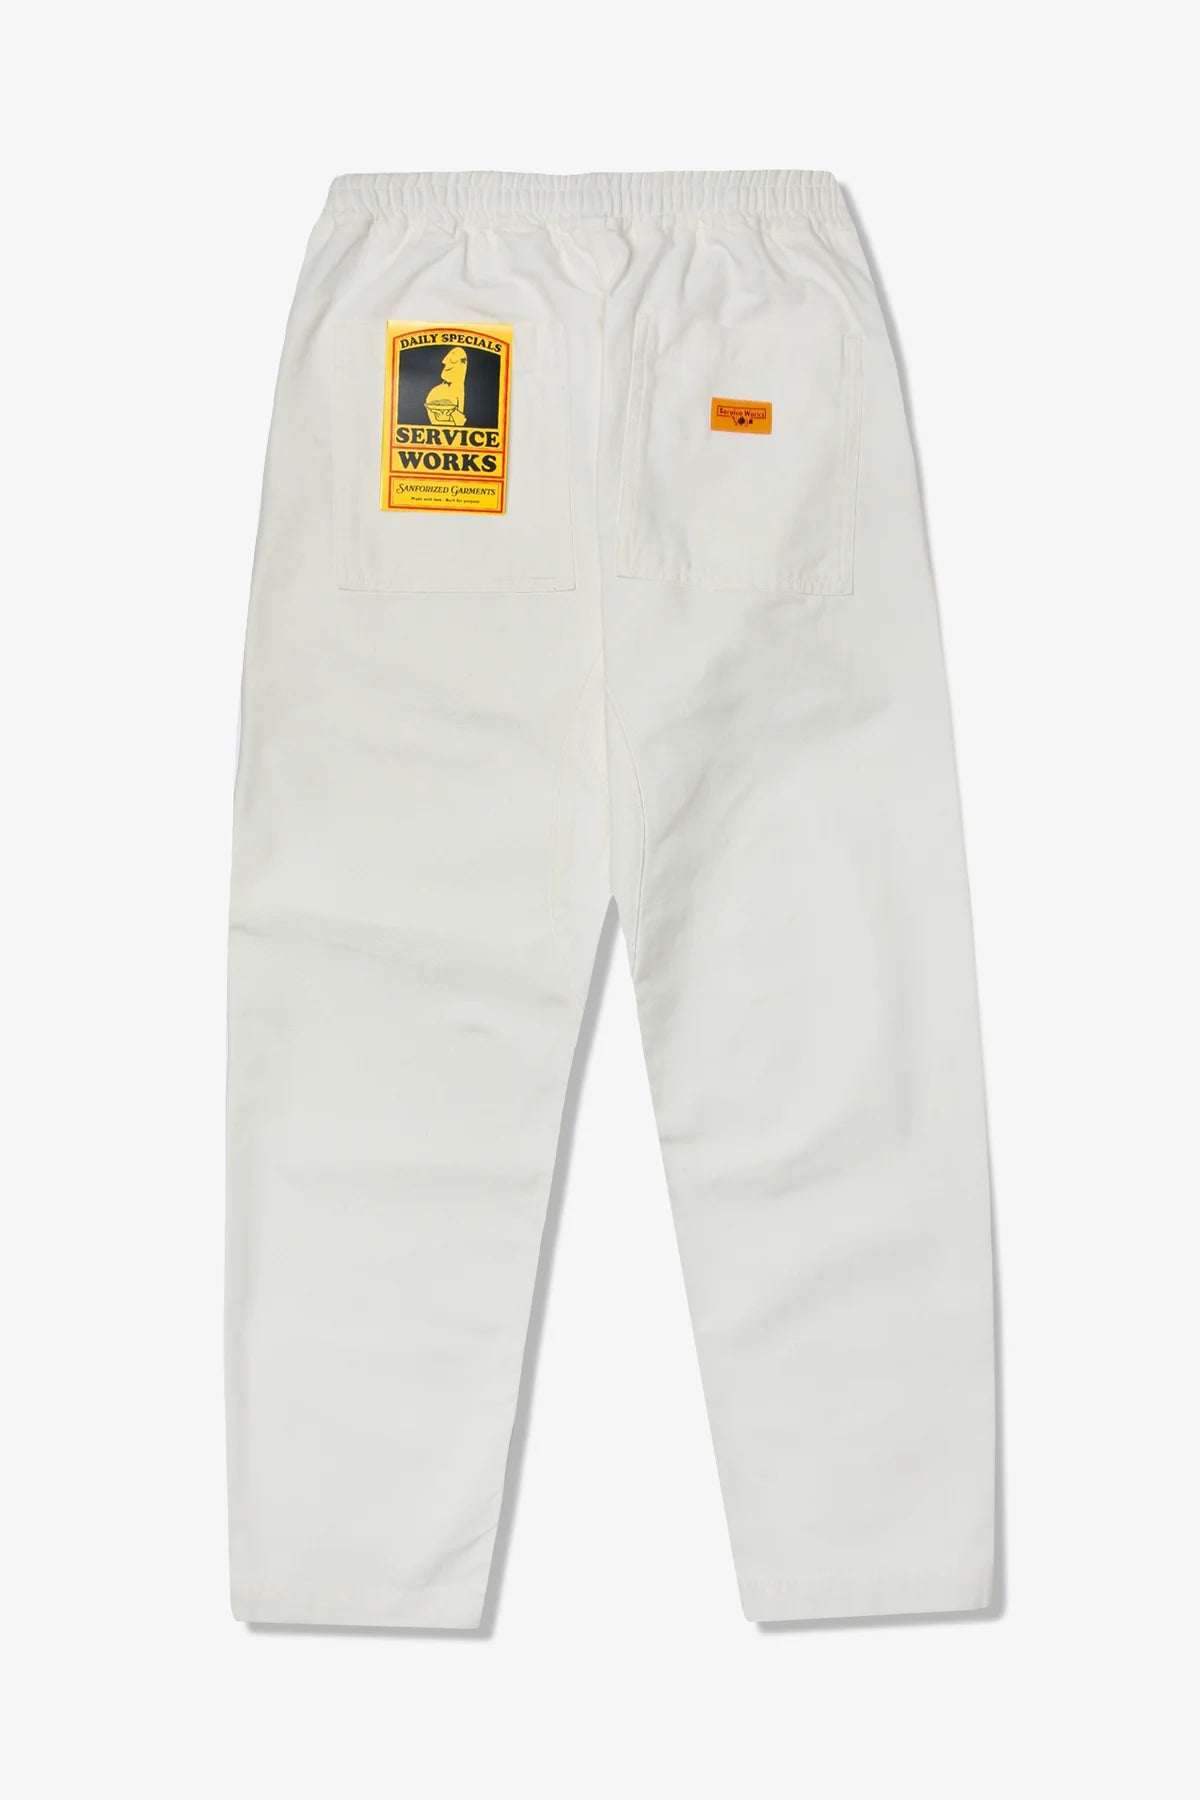 Service Works Classic Chef Tan-Hose